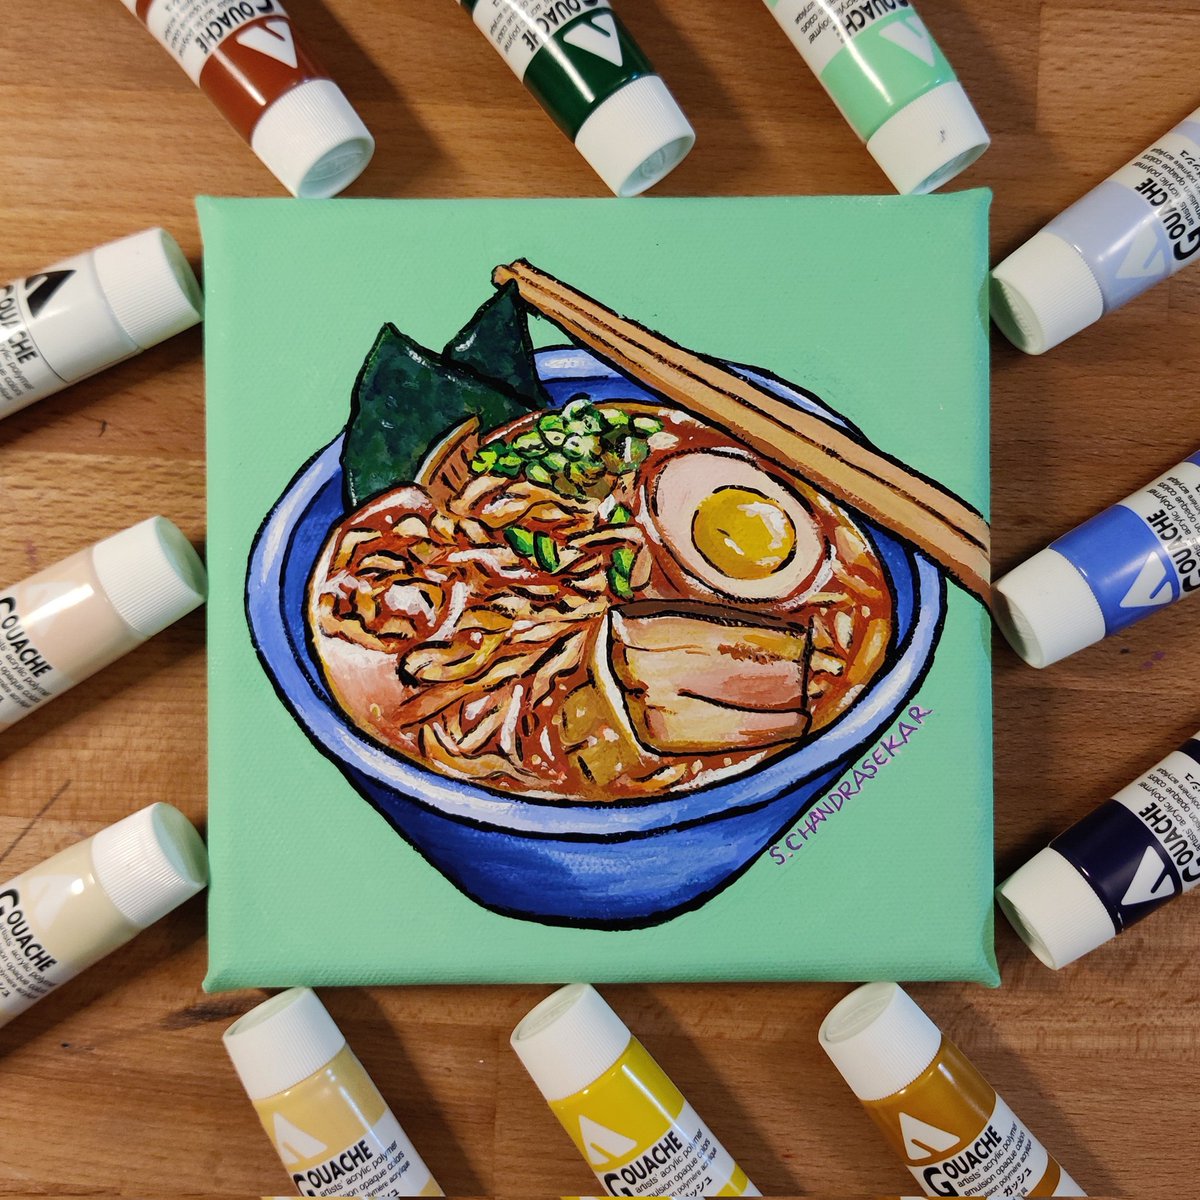 Anyone else feel like ramen today? Painted this last night for the hub's new cubicle space. Whet